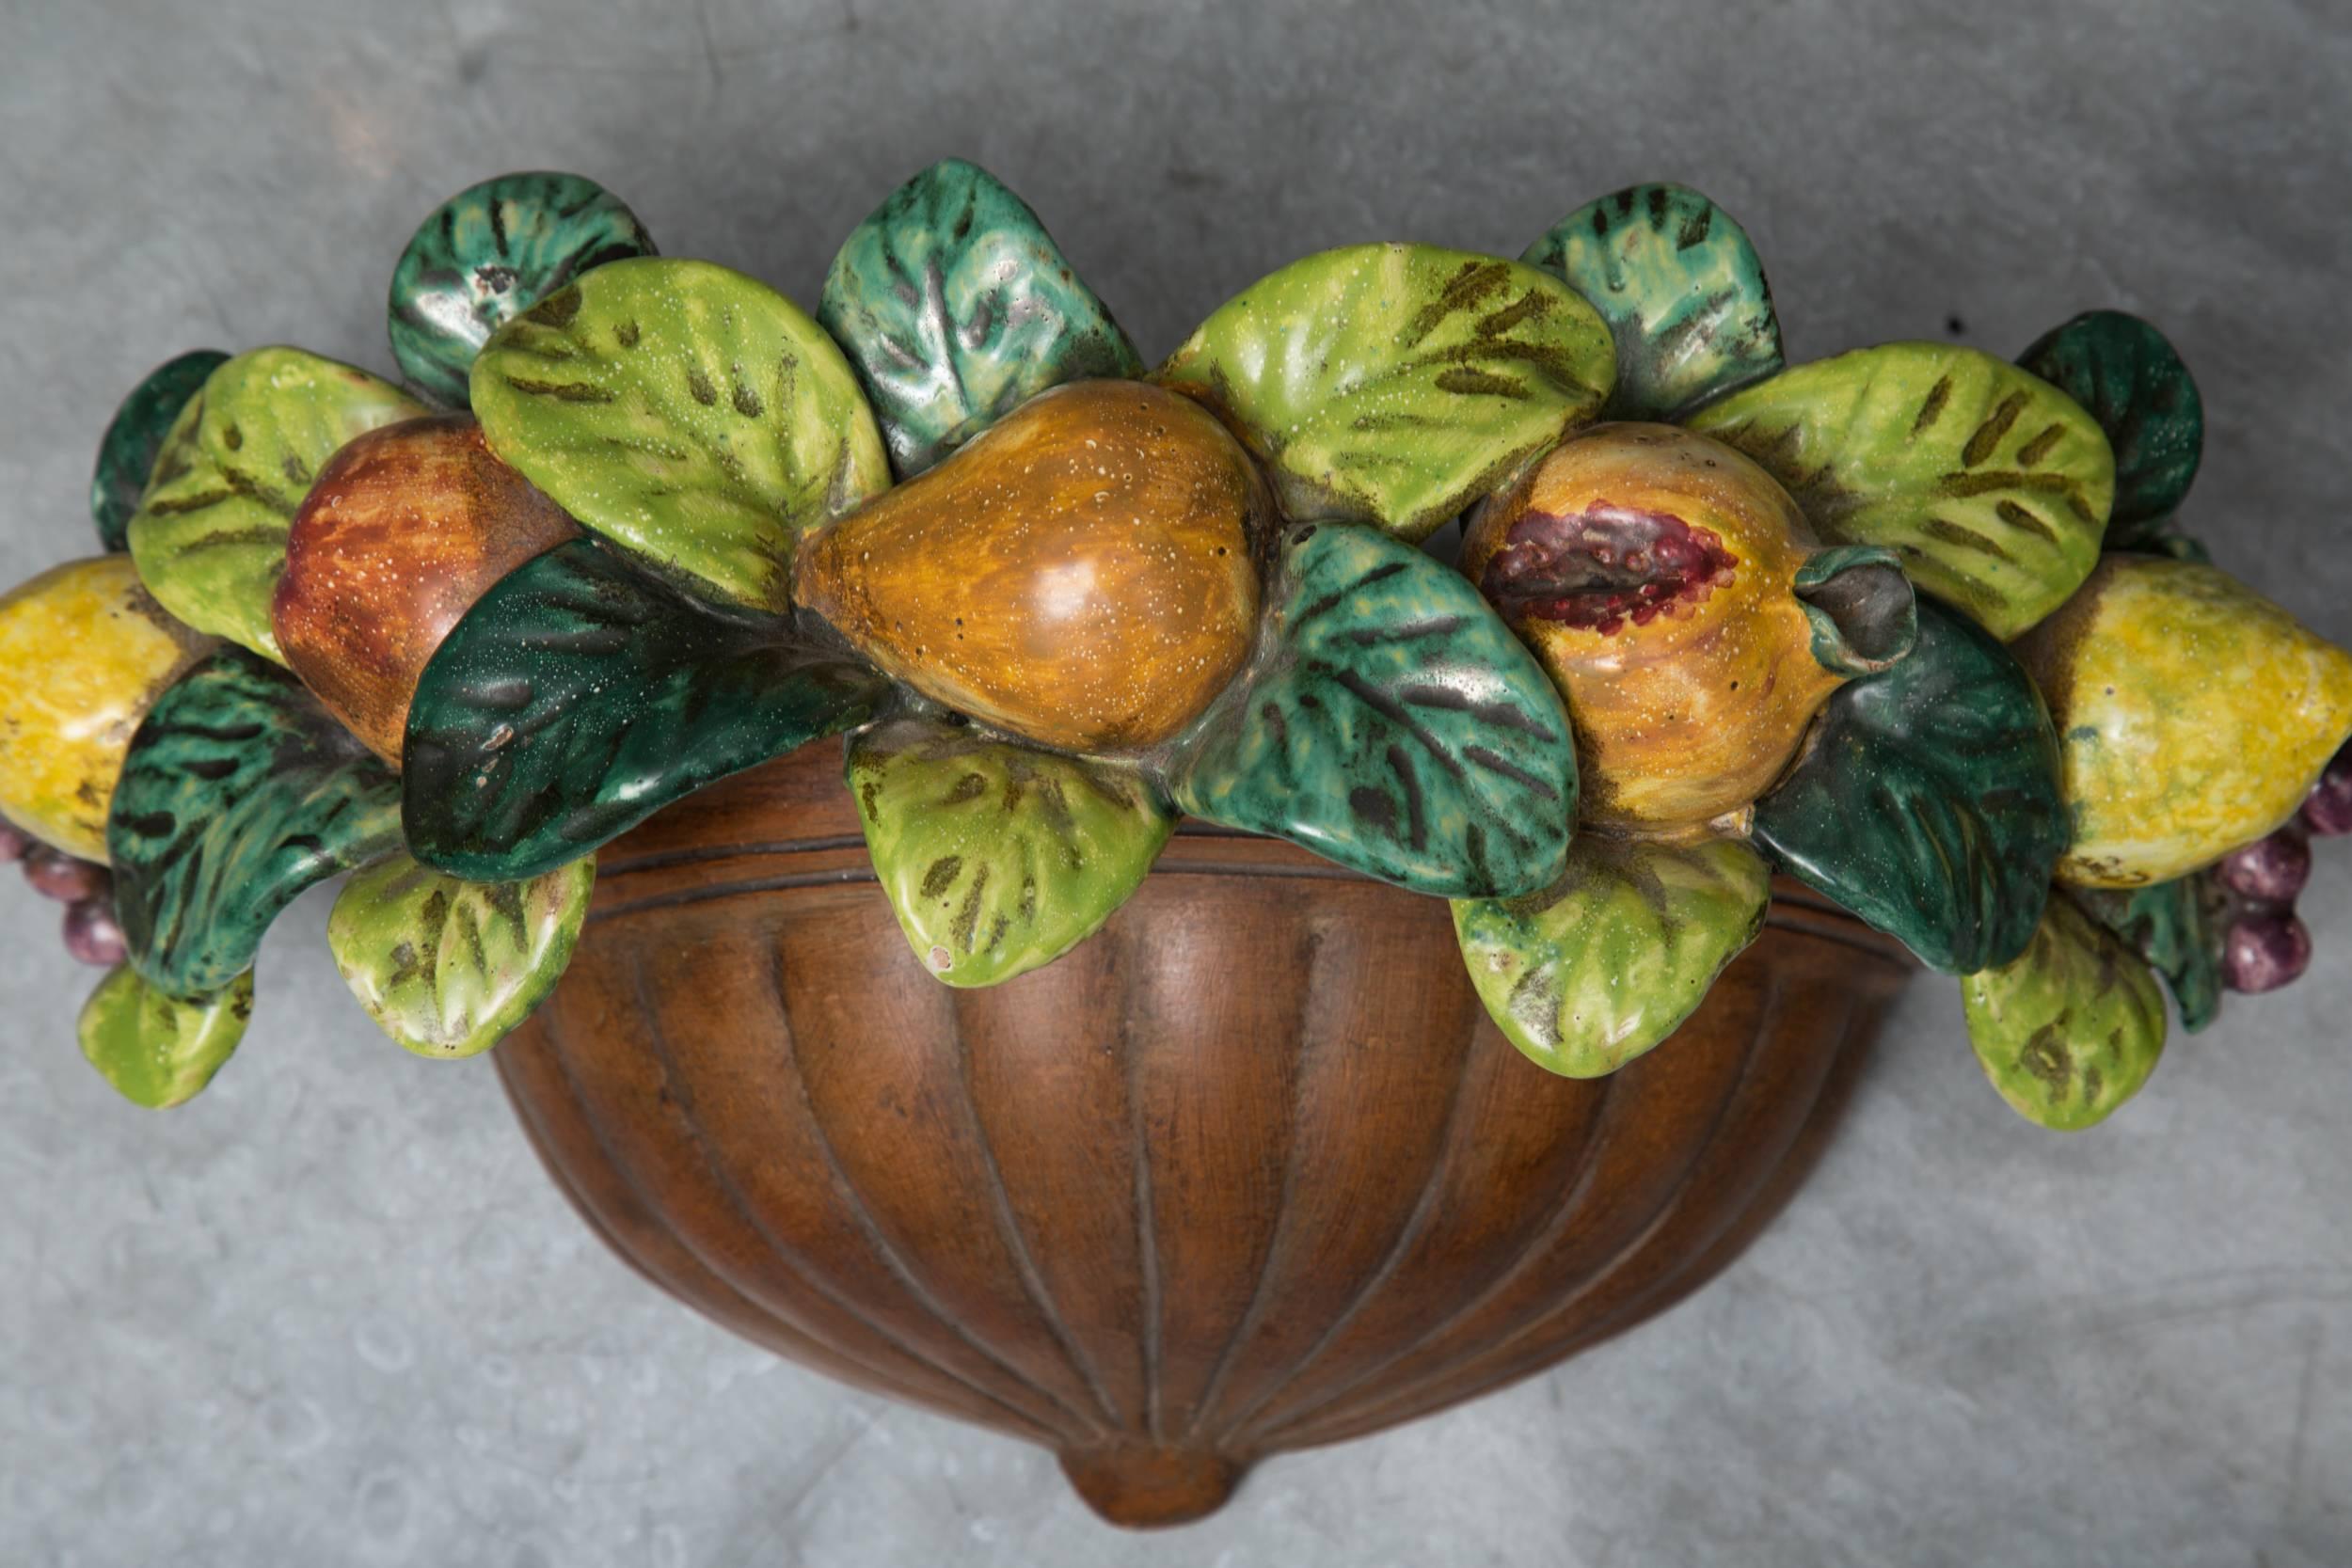 Pair of Italian Terracotta Wall Pockets with  Glazed Fruit Decoration  In Good Condition For Sale In WEST PALM BEACH, FL